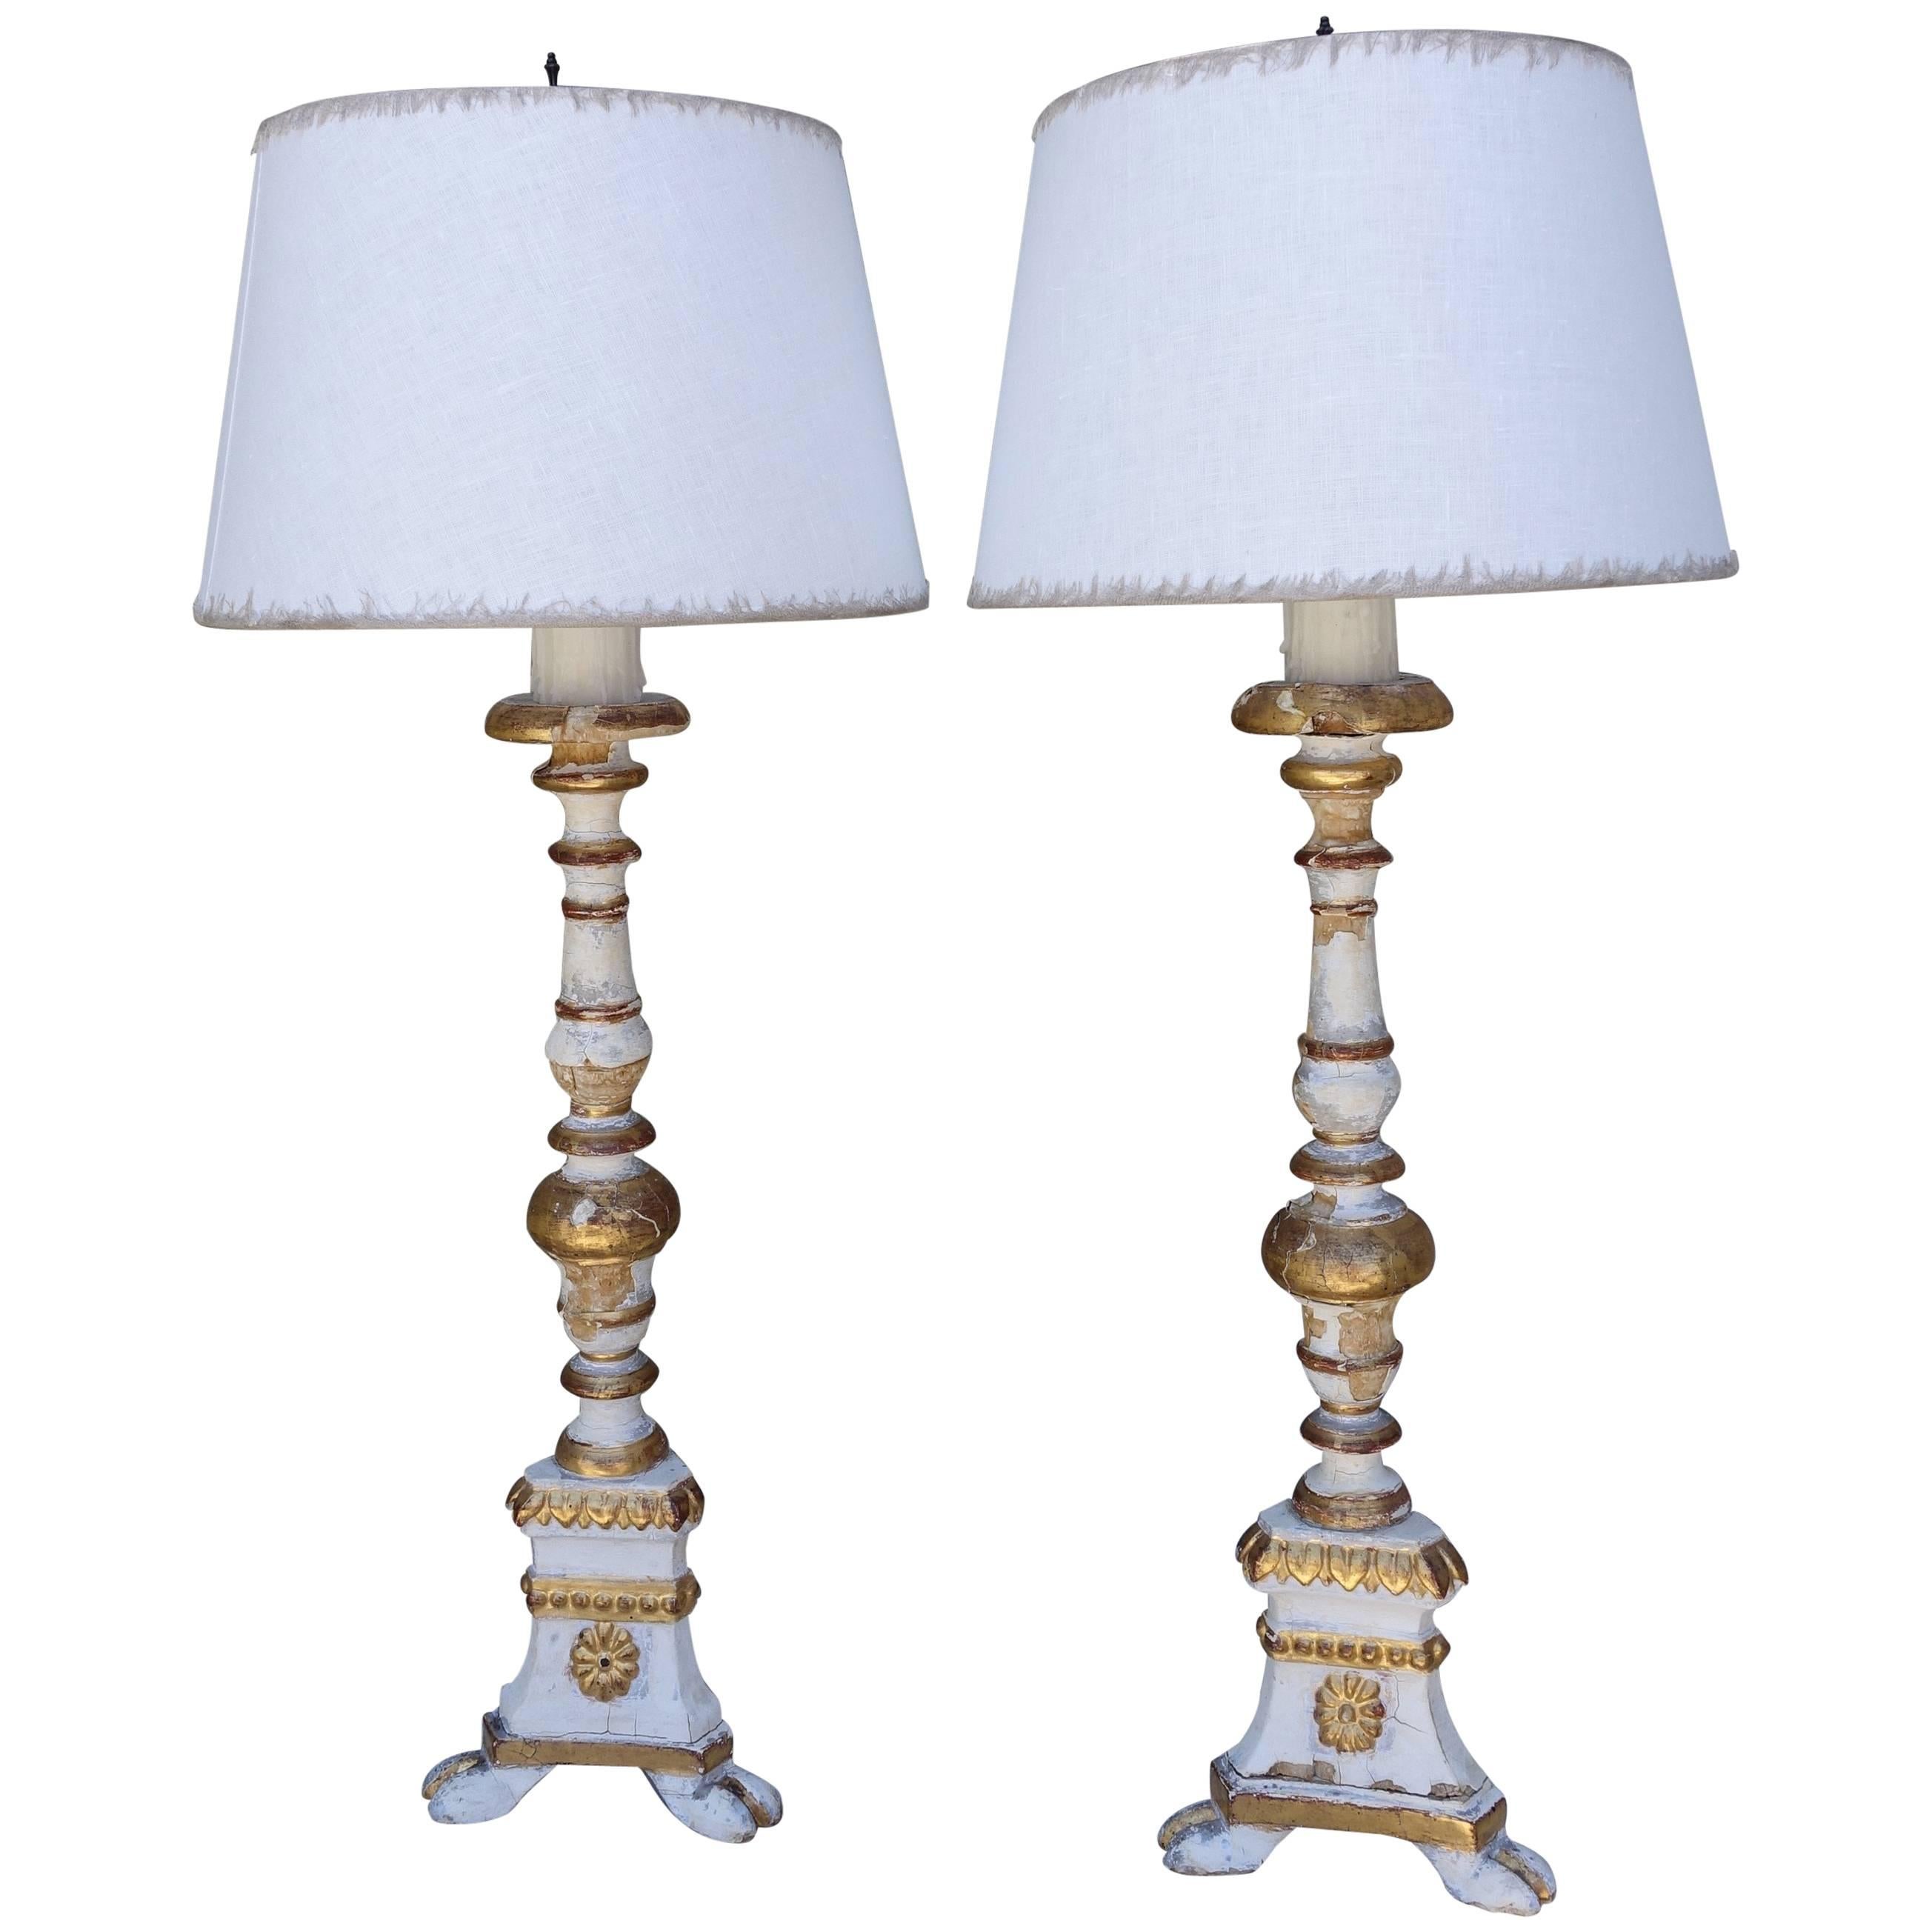 19th Century, Italian Painted and Parcel Gilt Lamps with Linen Shades